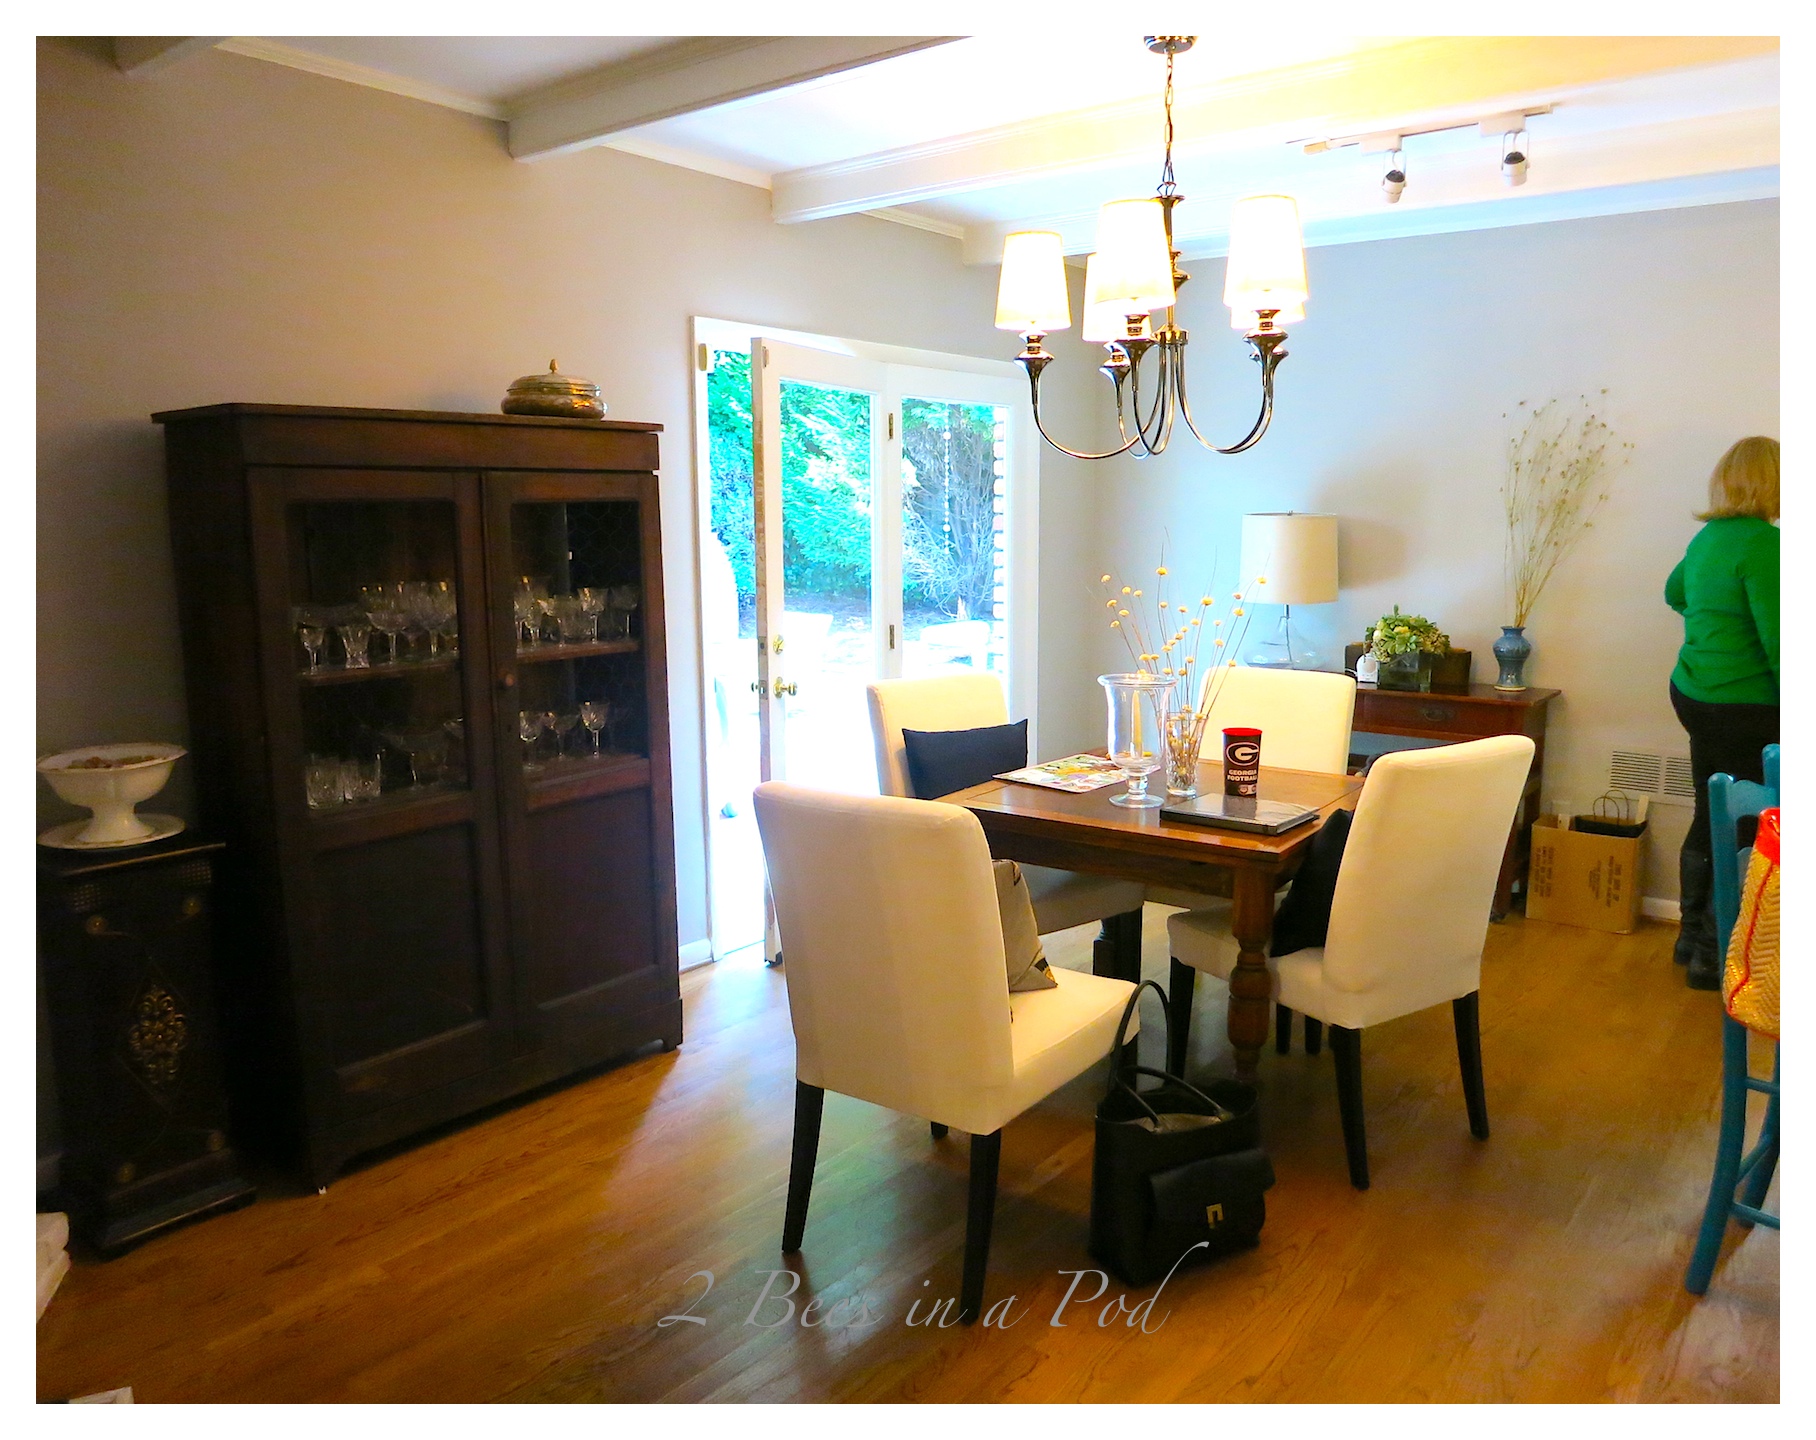 A dining area got a makeover...by just moving around furnishings and accessories a complete transformation and look was achieved.